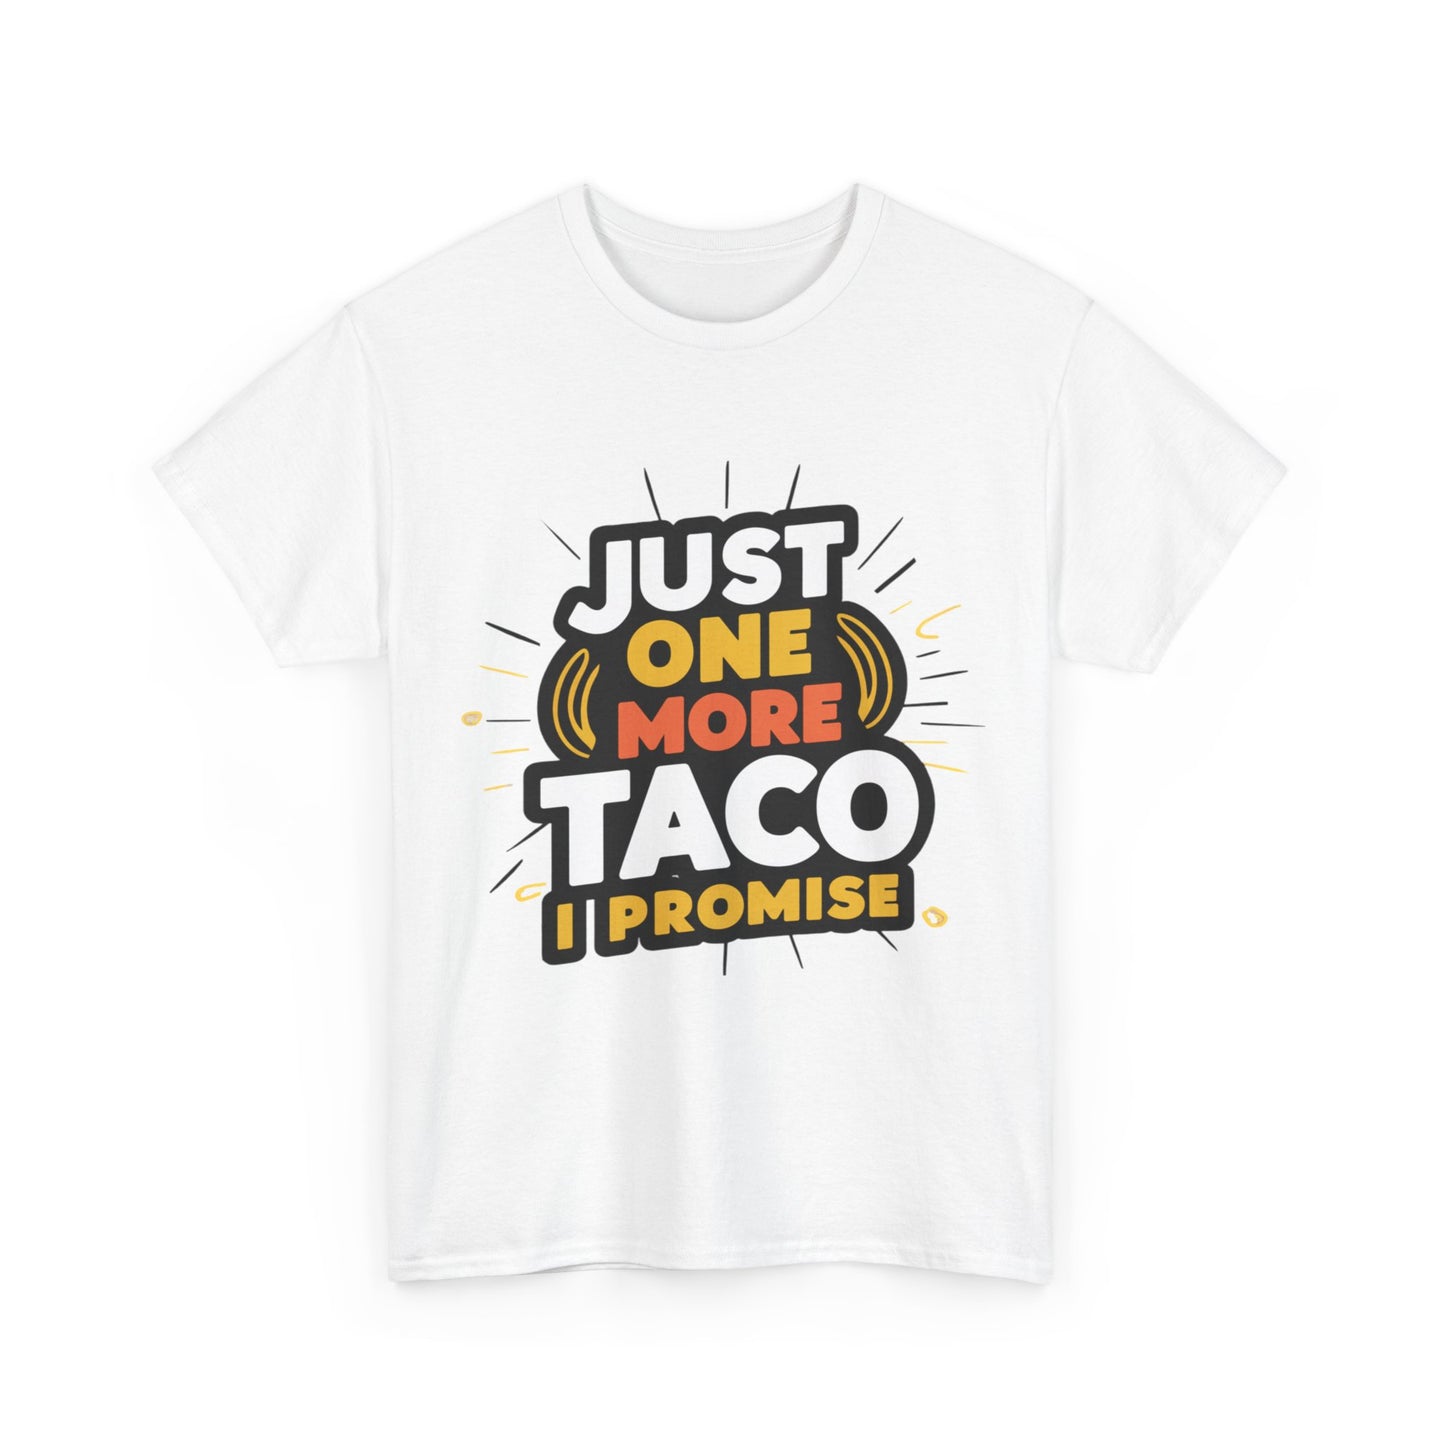 Just One More Taco I Promise Mexican Food Graphic Unisex Heavy Cotton Tee Cotton Funny Humorous Graphic Soft Premium Unisex Men Women White T-shirt Birthday Gift-42